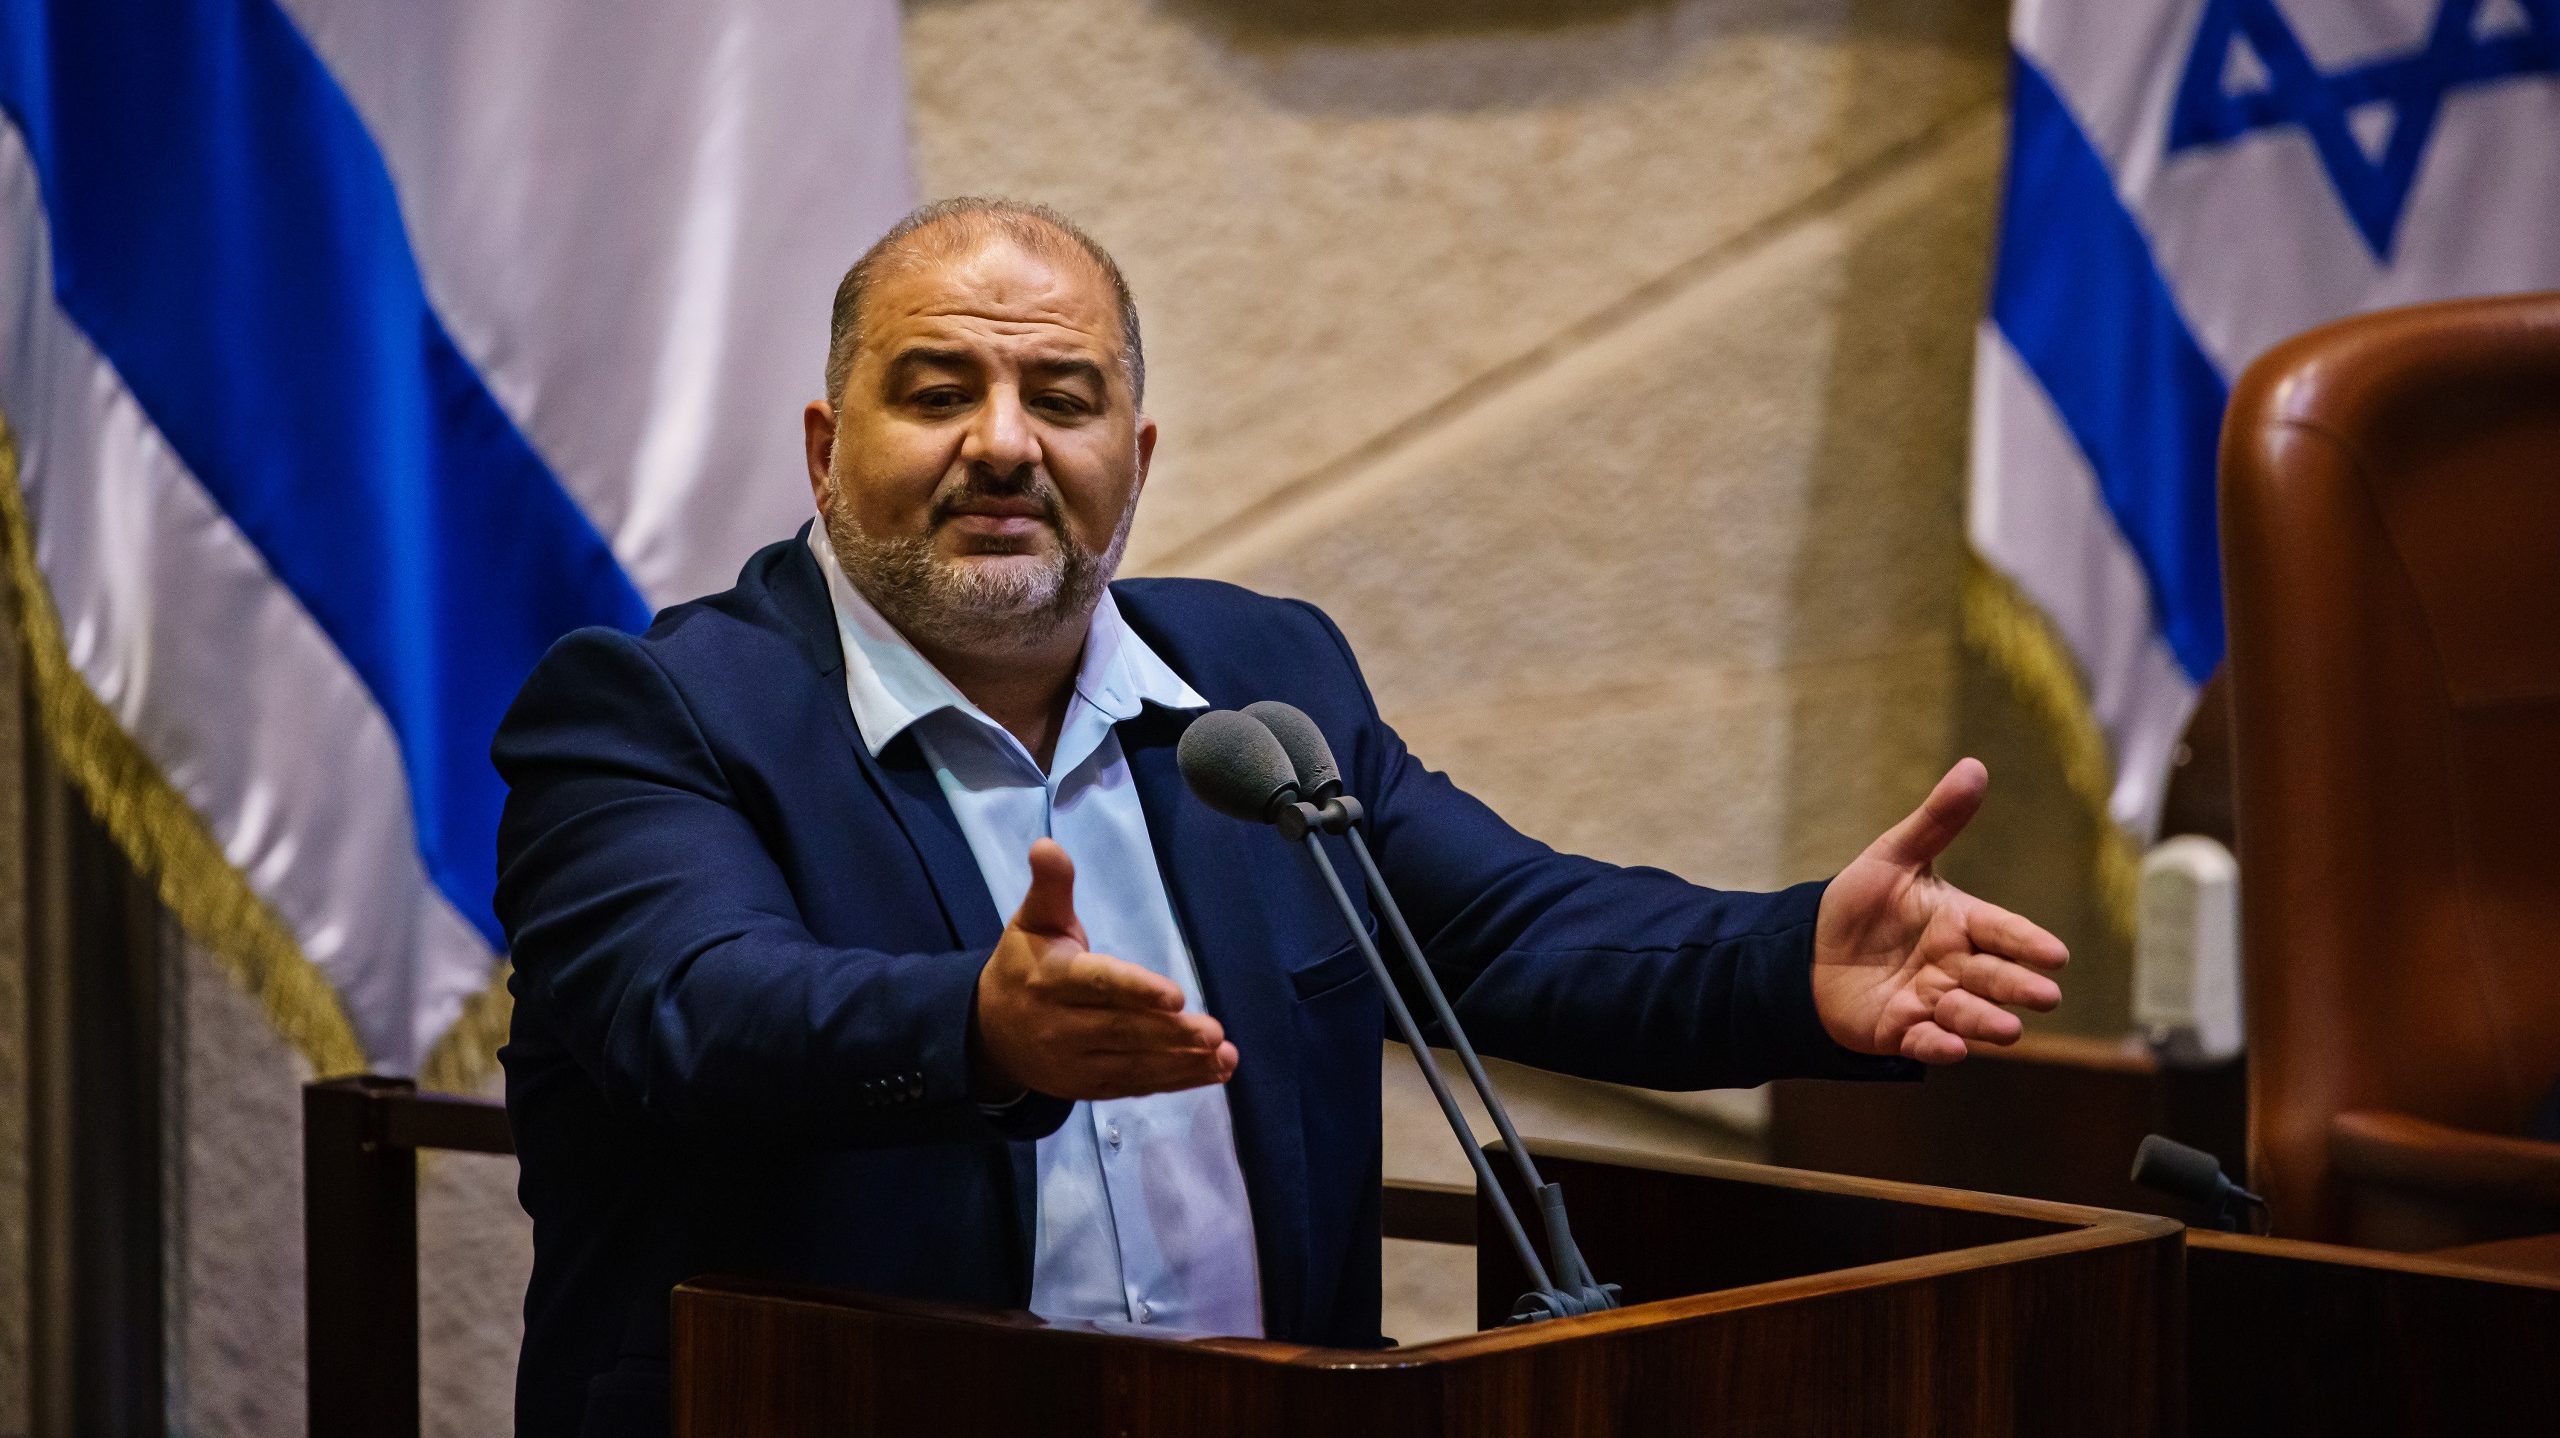 Who Is Mansour Abbas and Why Does He Make Jewish and Arab Lawmakers Uncomfortable?